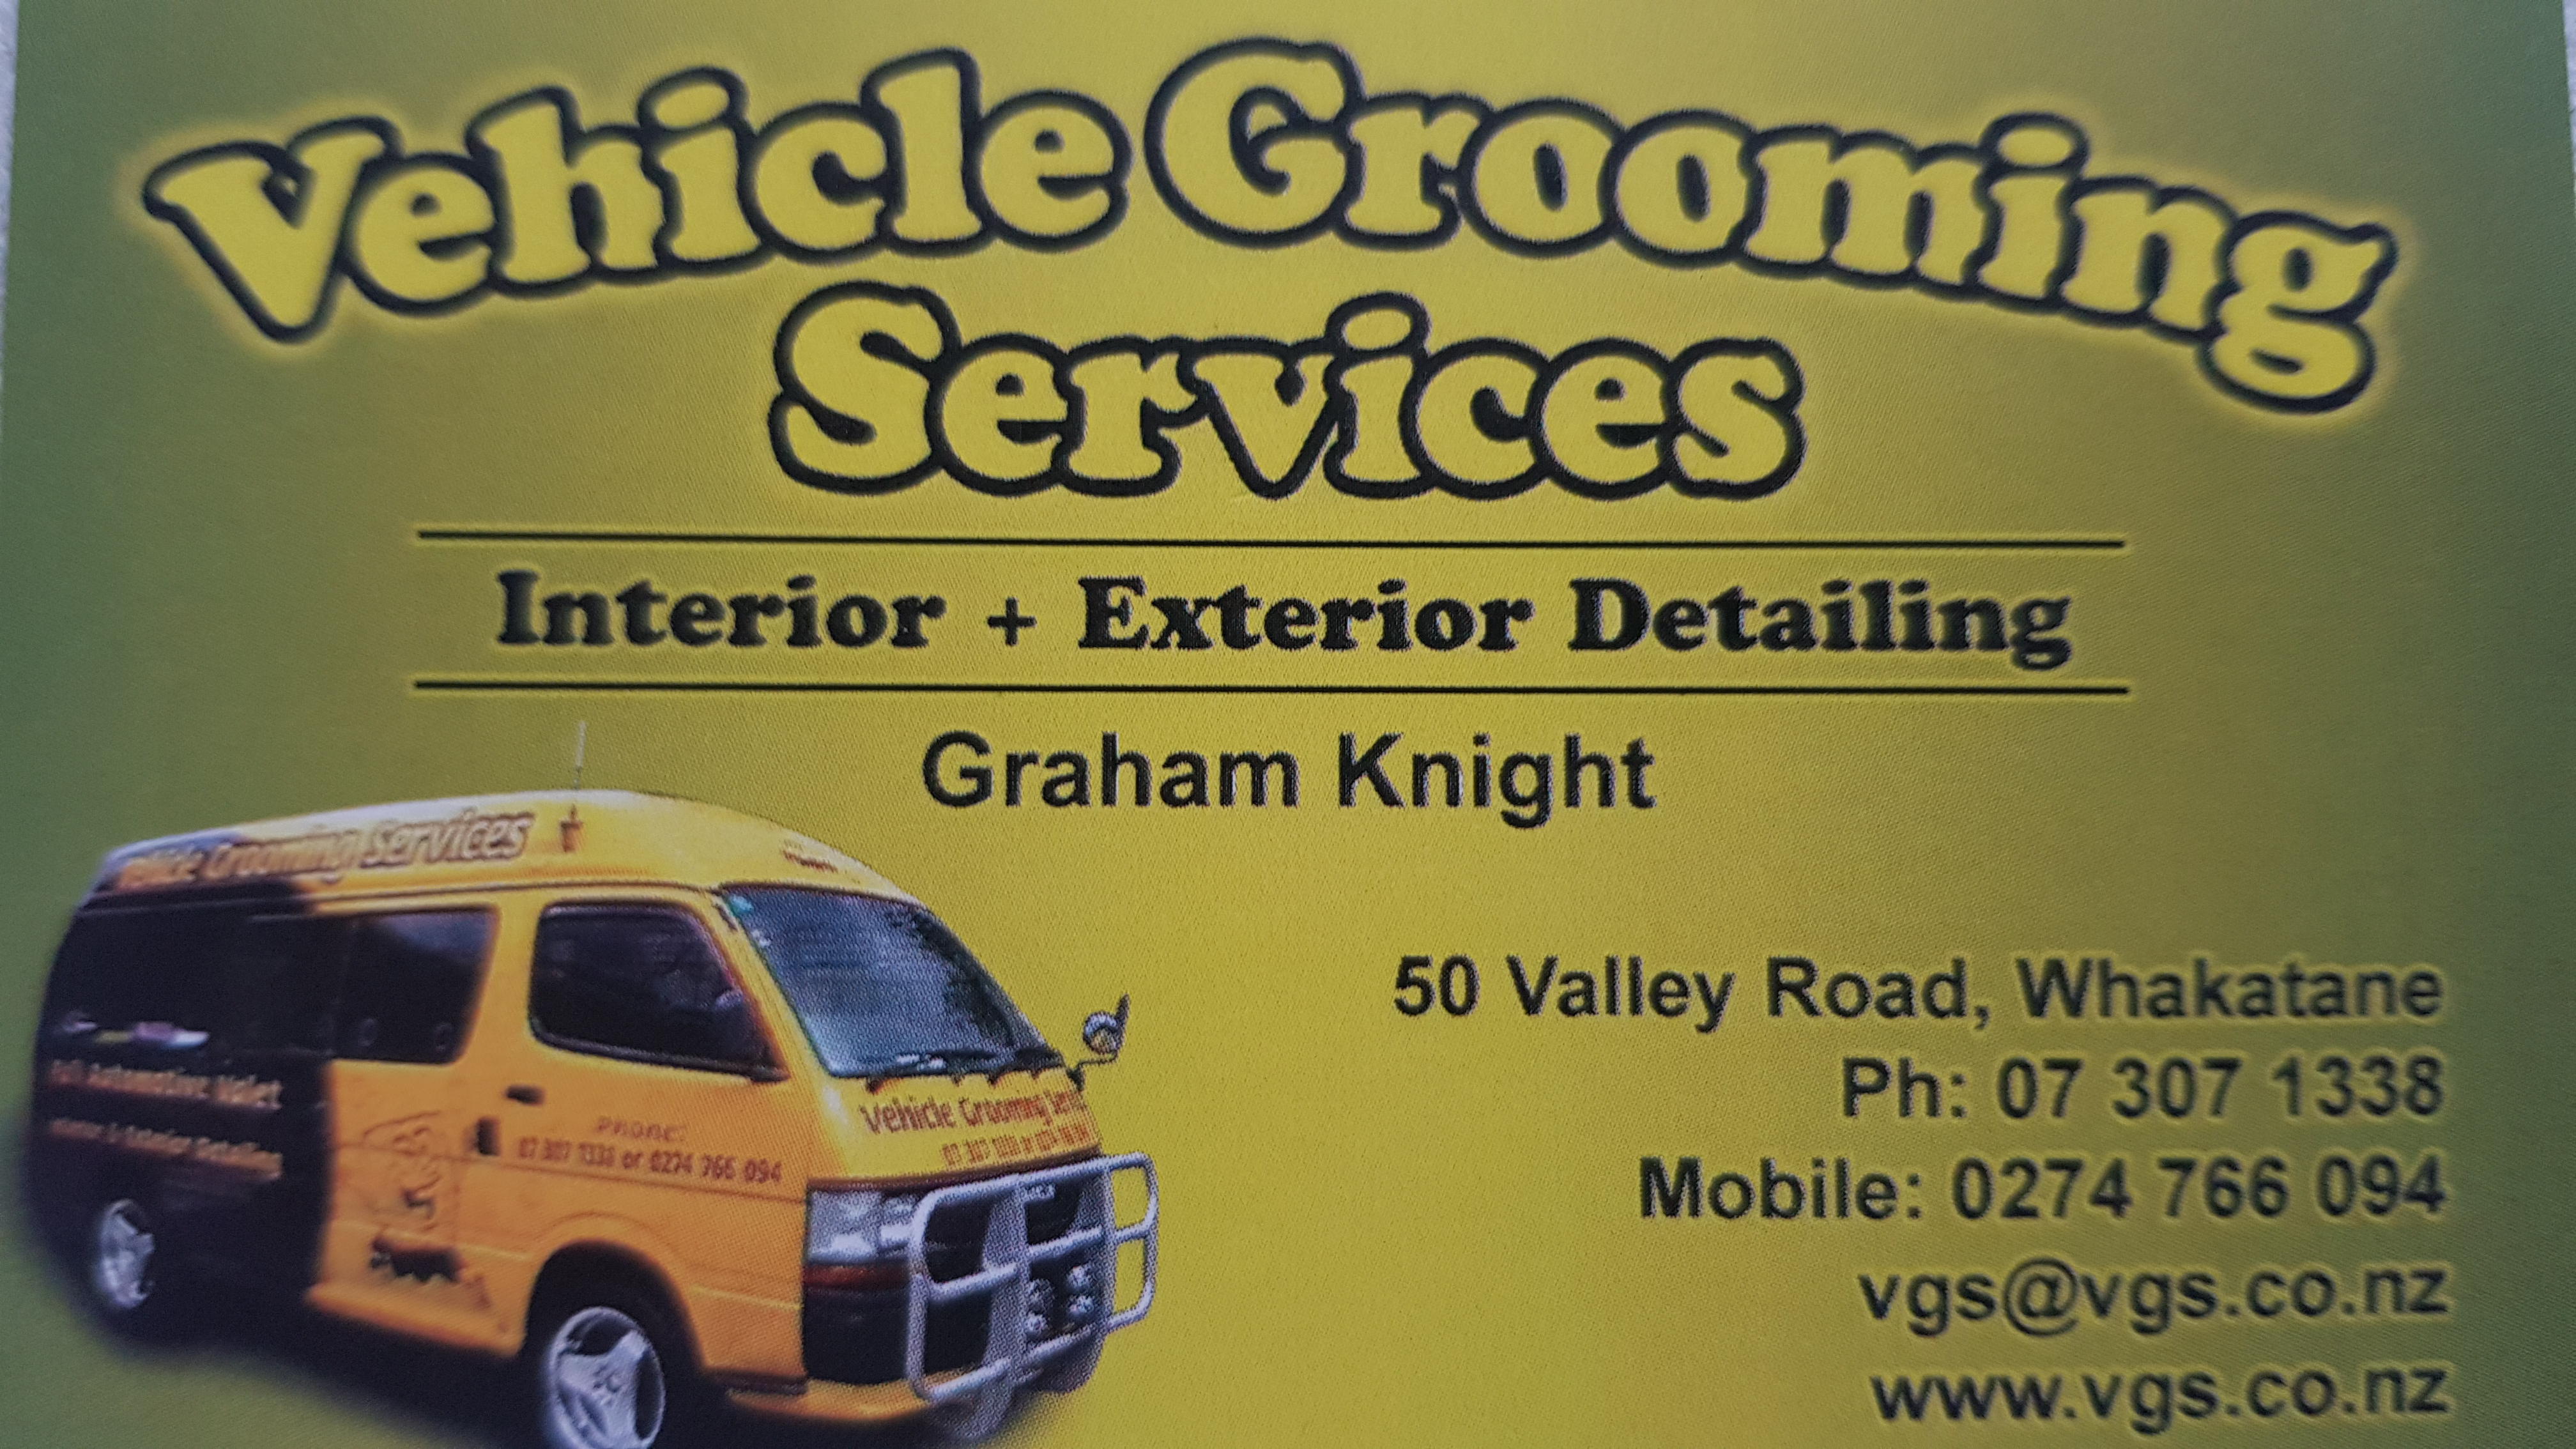 Vehicle Grooming Services